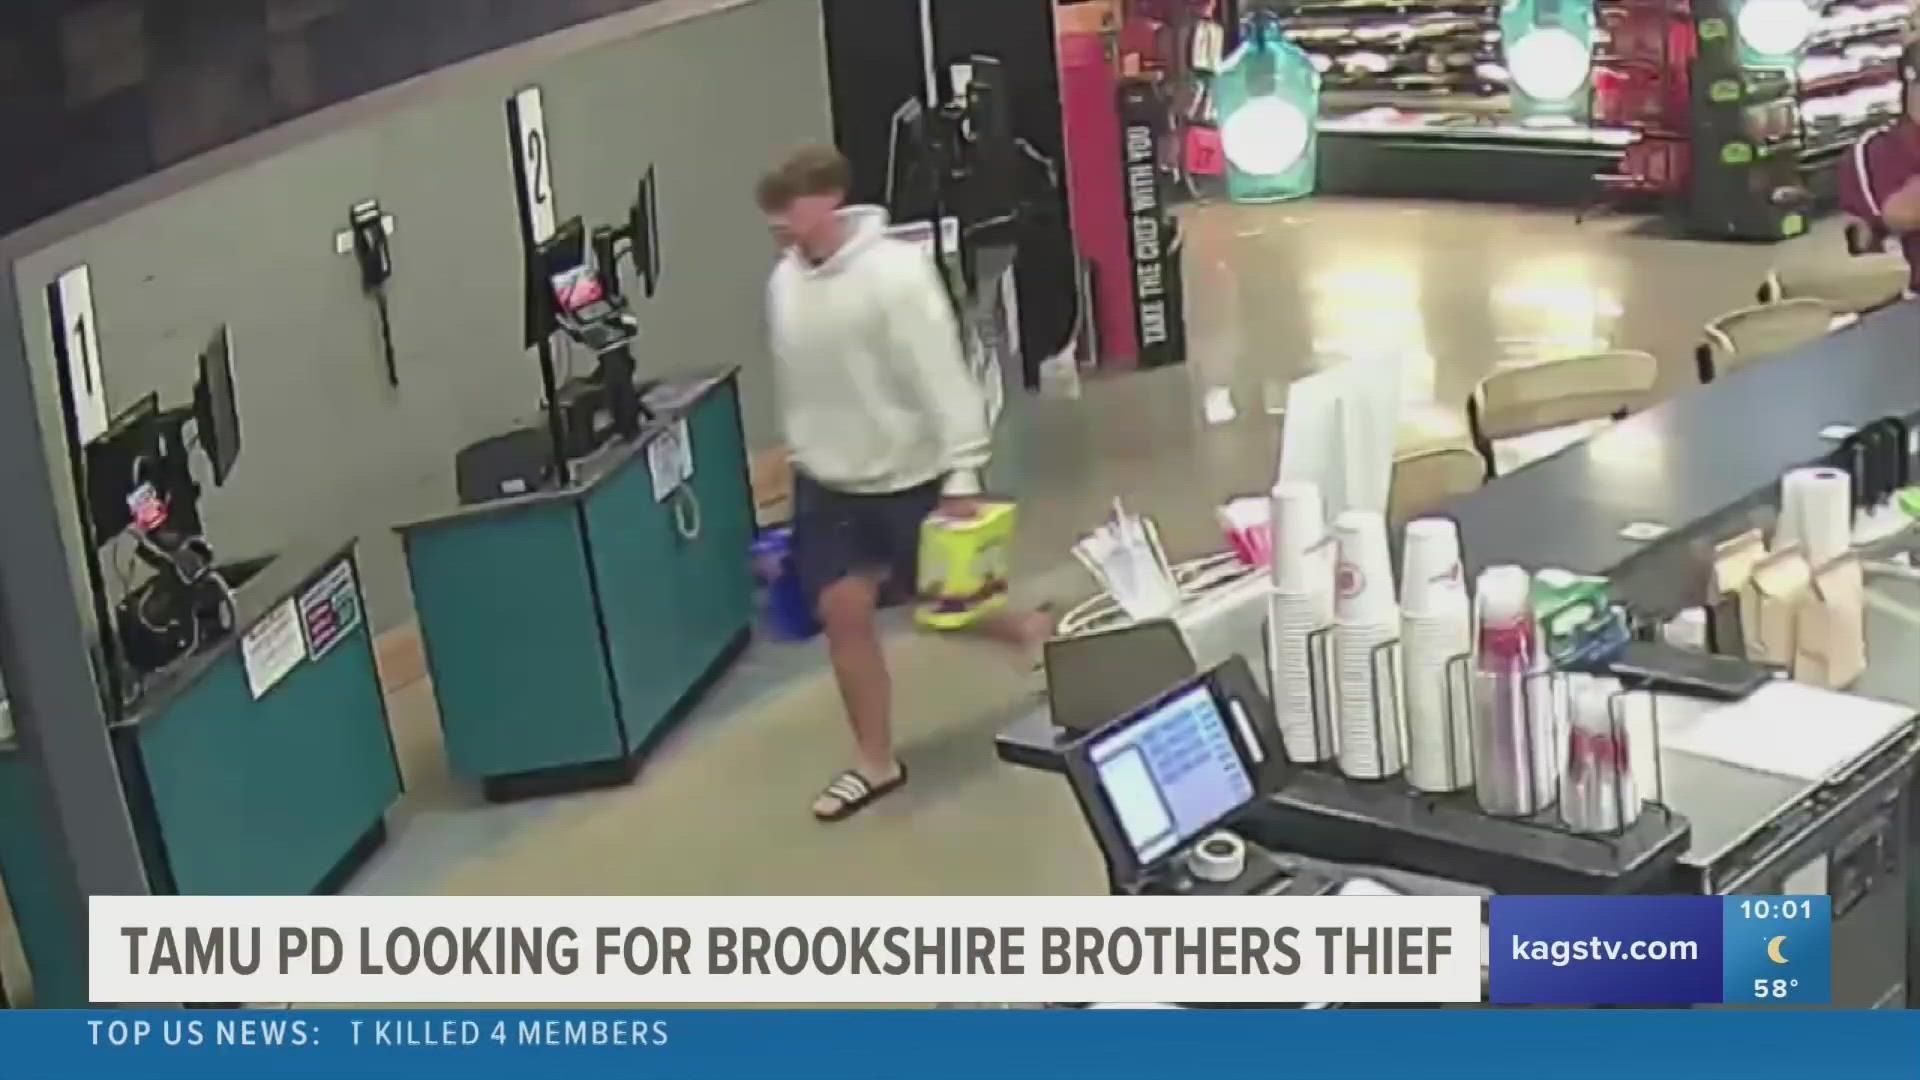 The individual allegedly took beer and spiked lemonade from Brookshire Brothers around 4 p.m. on Dec. 2.